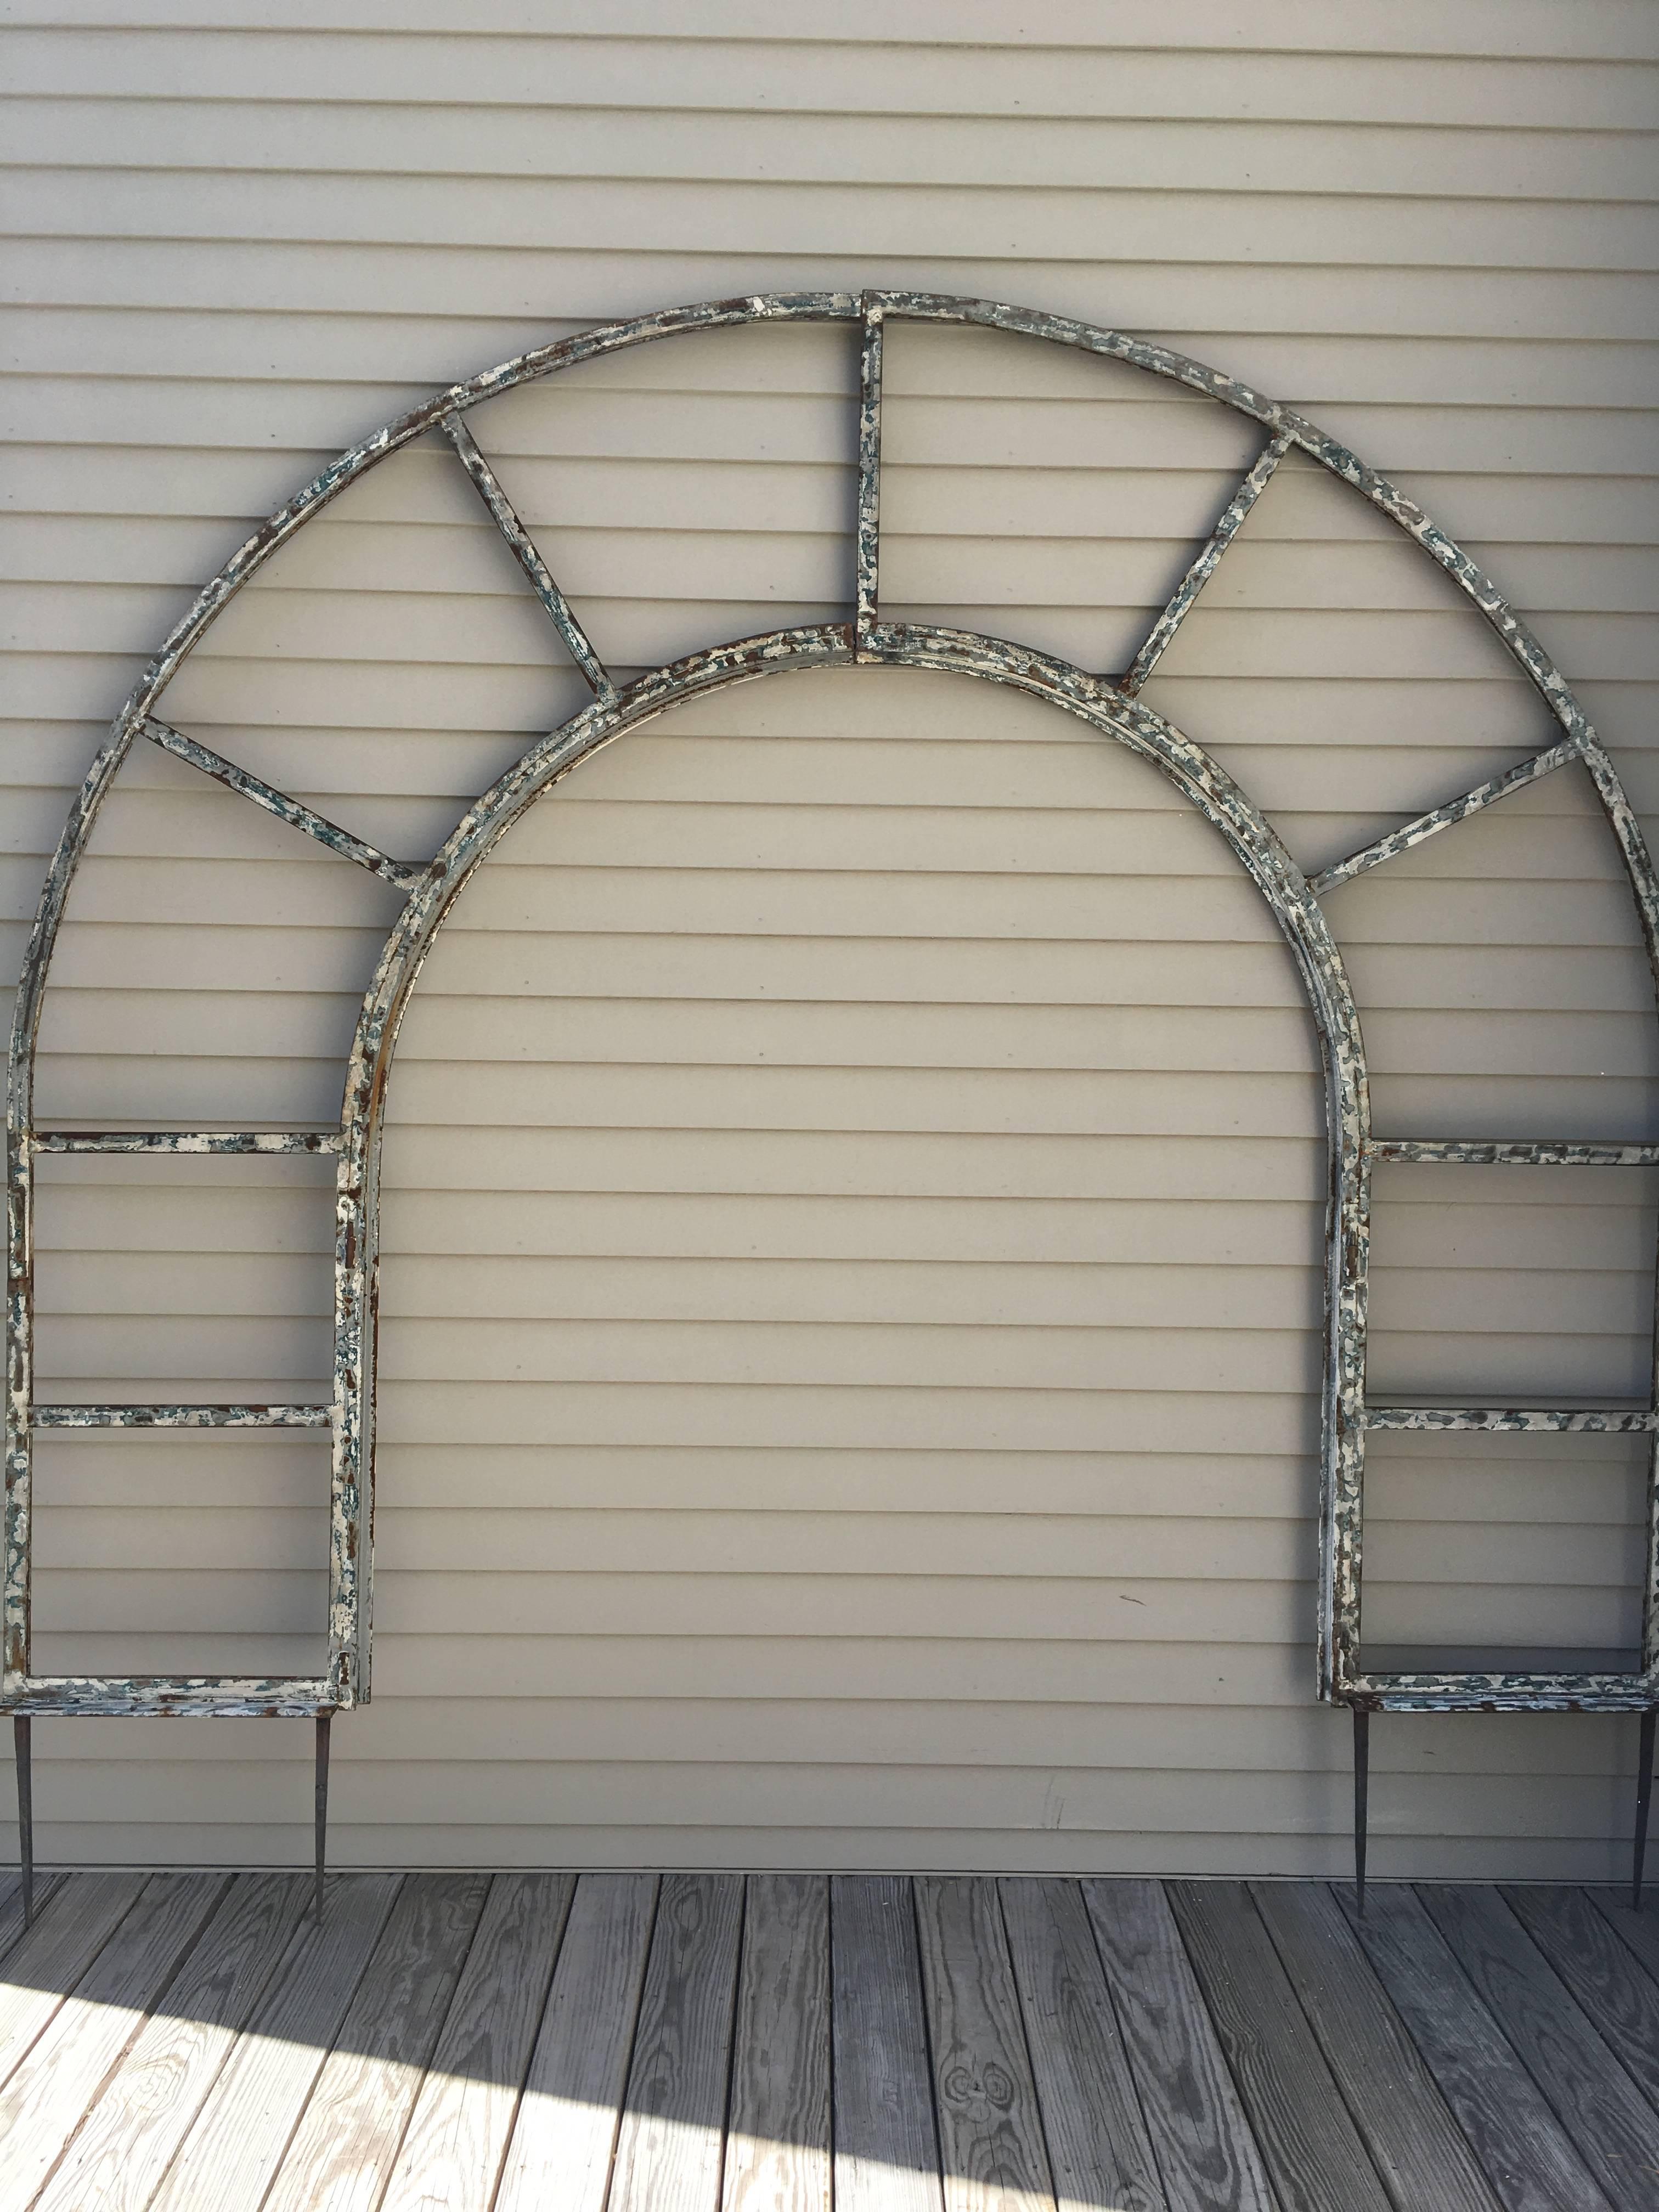 We have transformed this huge and very heavy painted steel window frame into an arched arbor or trellis that`s perfect for your climbing vines or roses. Impressive in scale and form, we have added four 14" long steel spikes to the bottom so